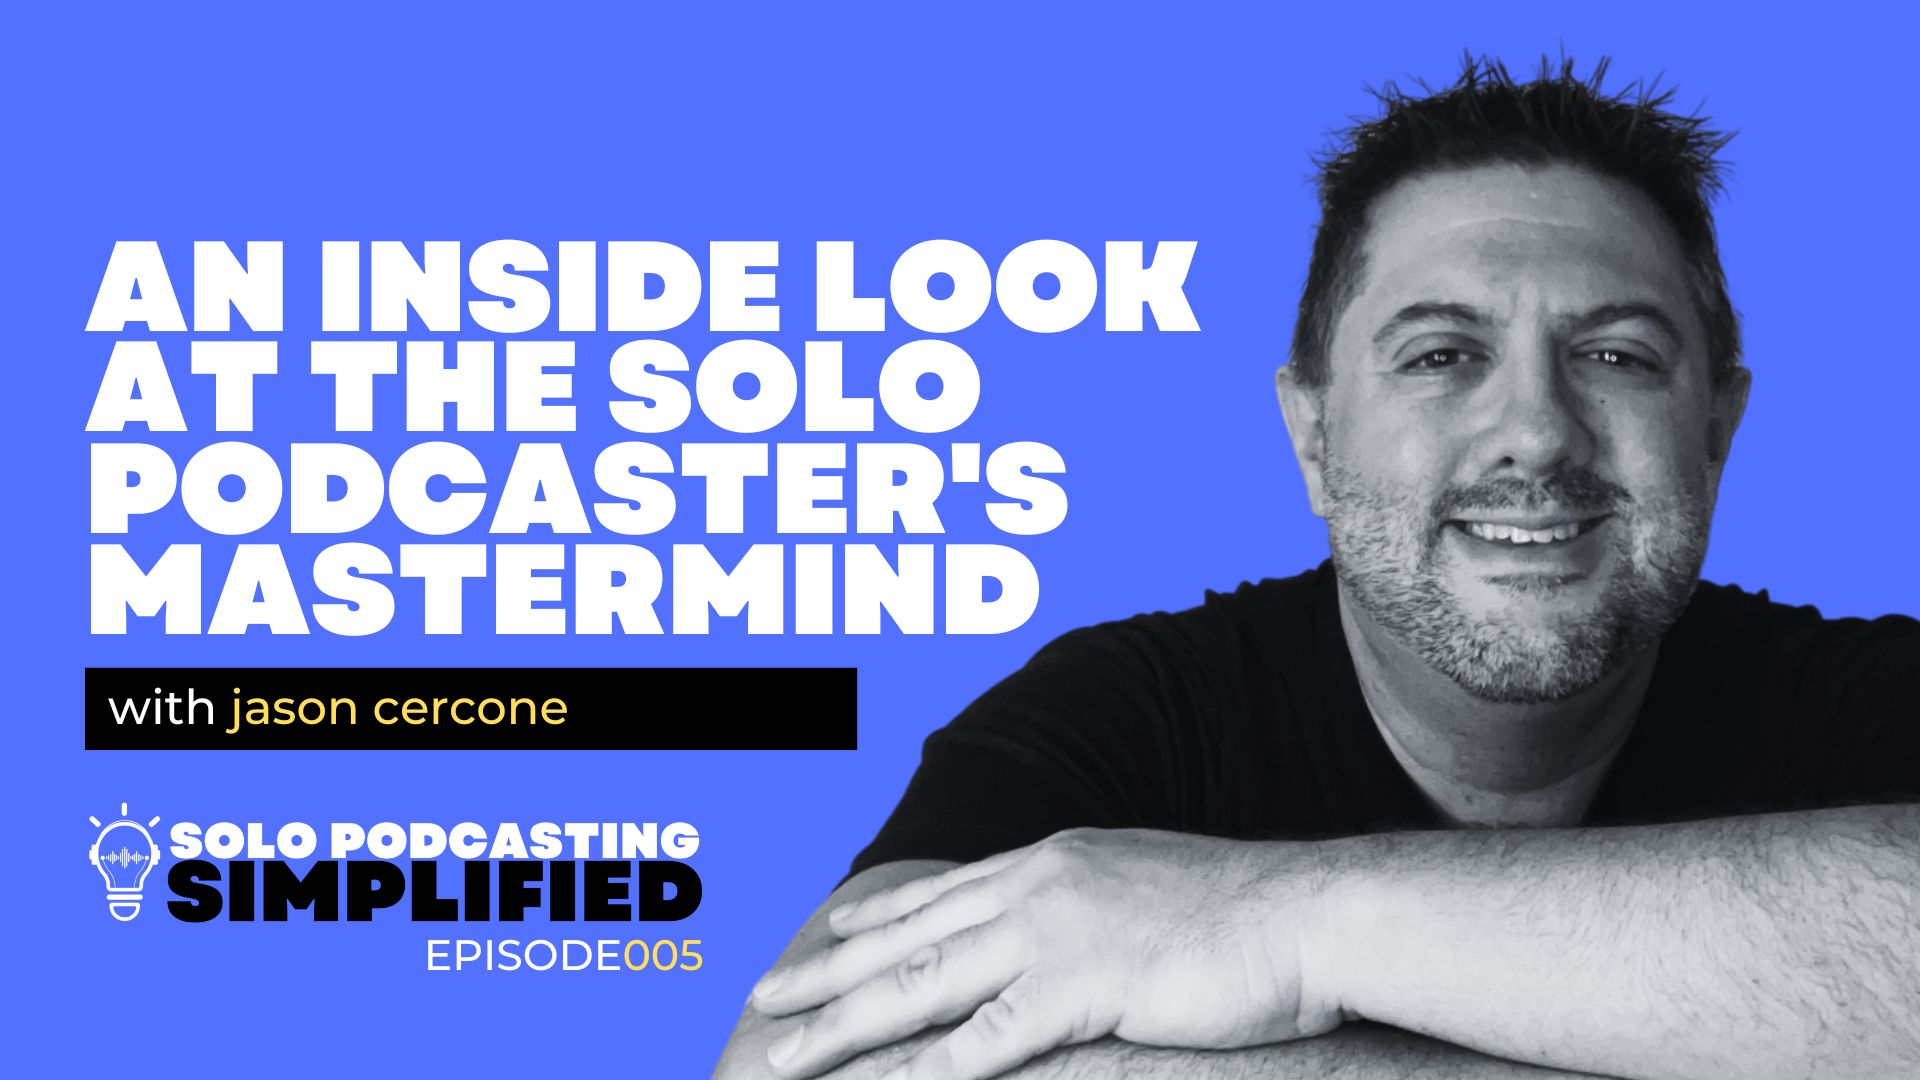 Join The Solo Podcaster's Mastermind today!